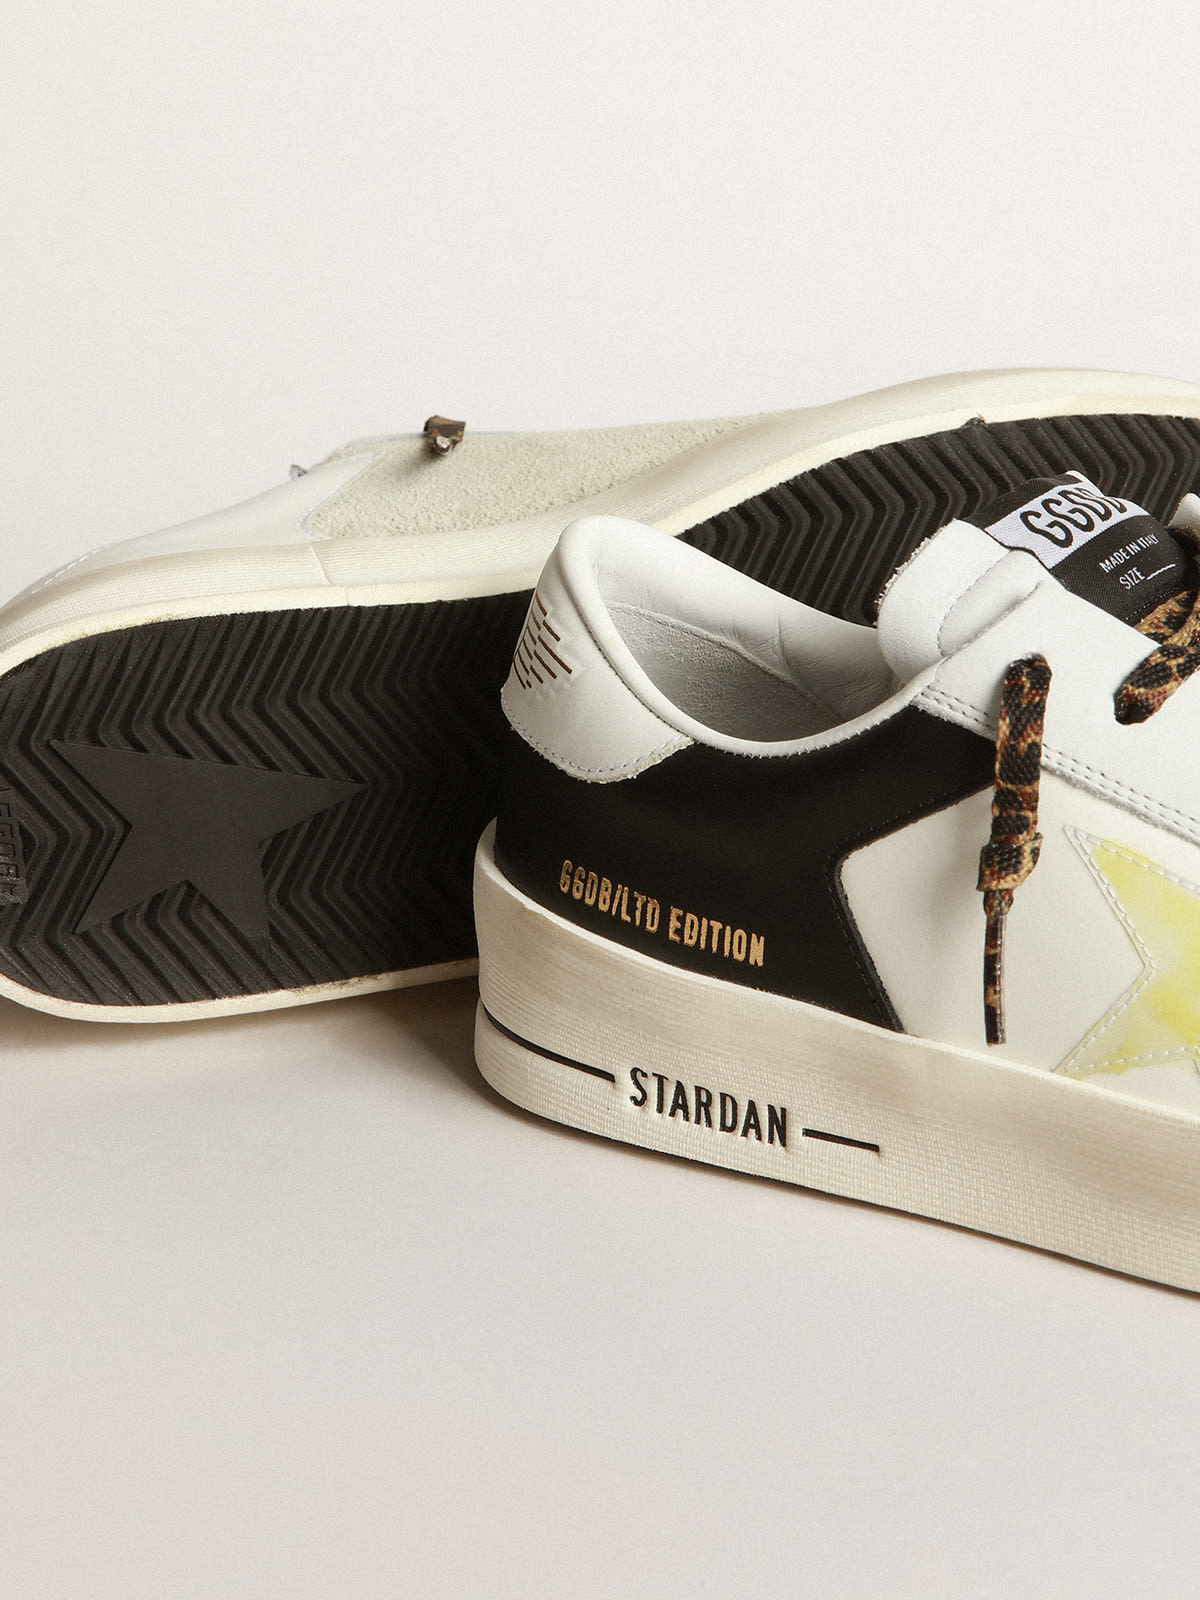 Golden Goose - Stardan LTD sneakers in black and white leather with yellowed-effect transparent PVC star in 